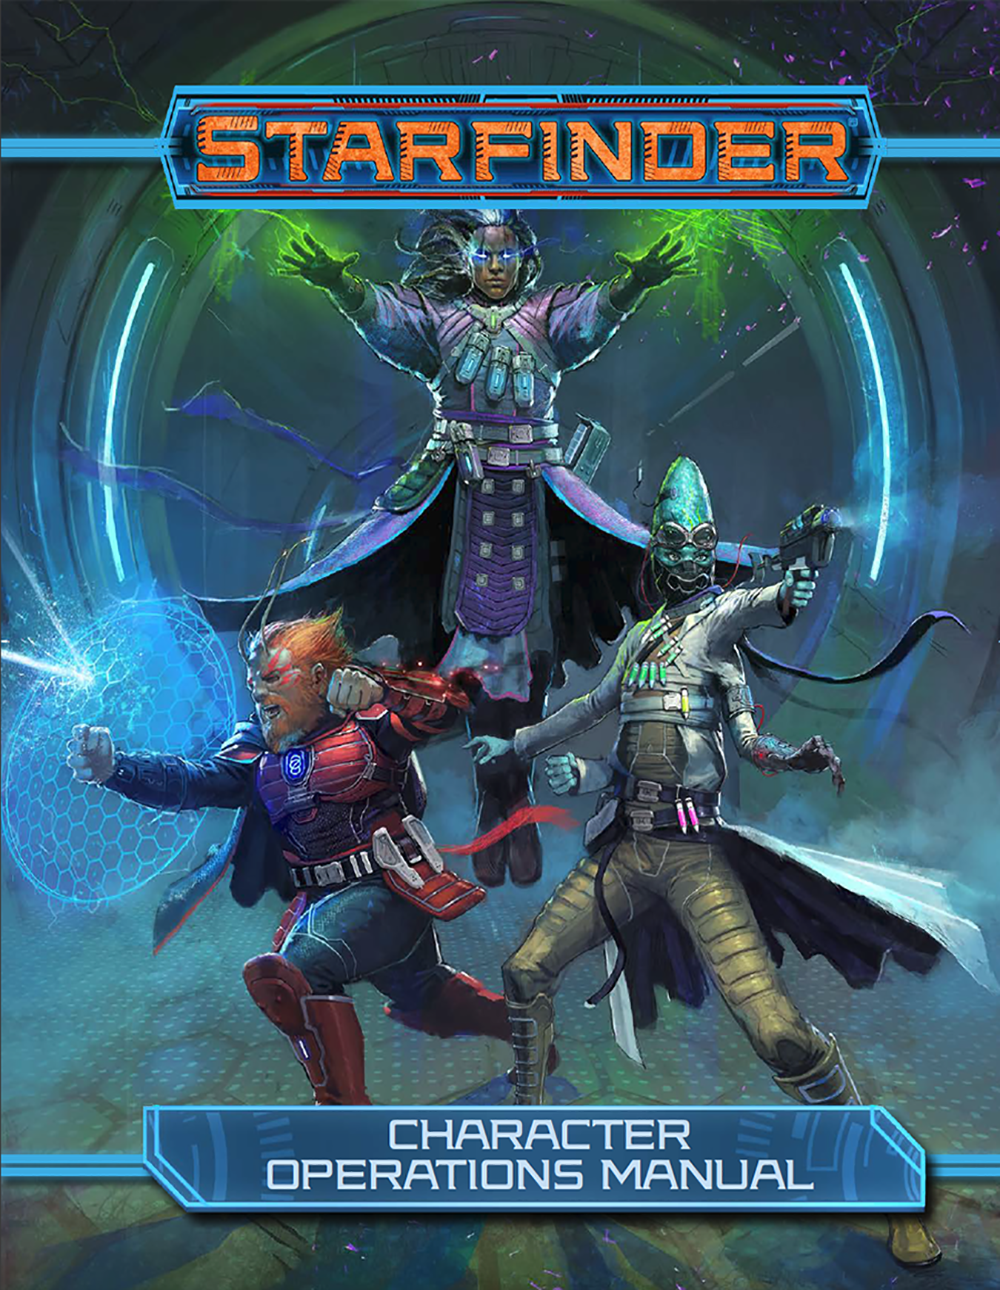 Character Operations Manual - Starfinder RPG